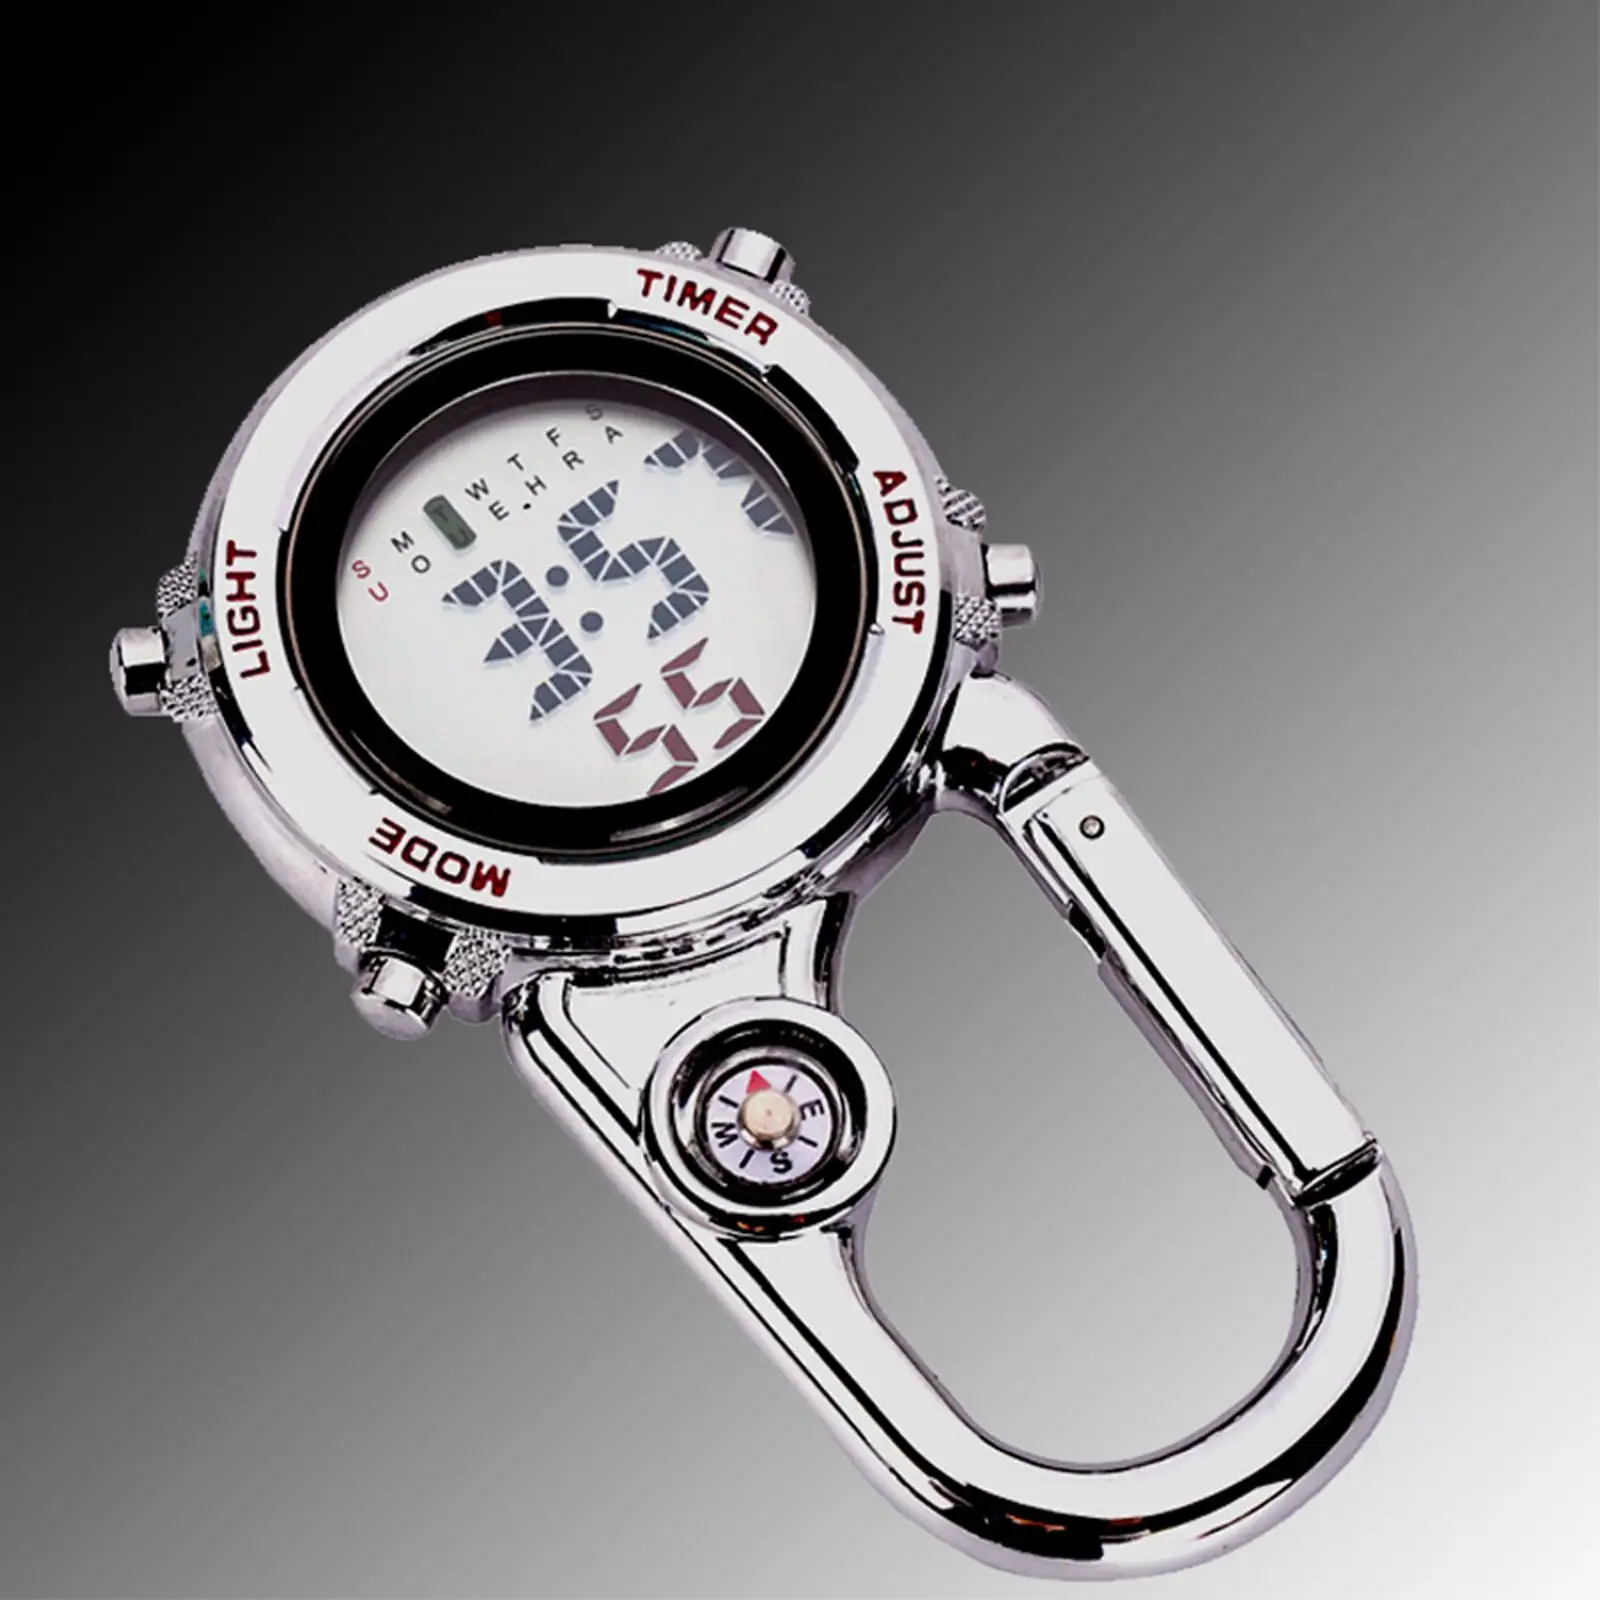 Multi Function Digital Carabiner Watch Unisex Pocket Watch Backpack Fob Watch for Work Chefs